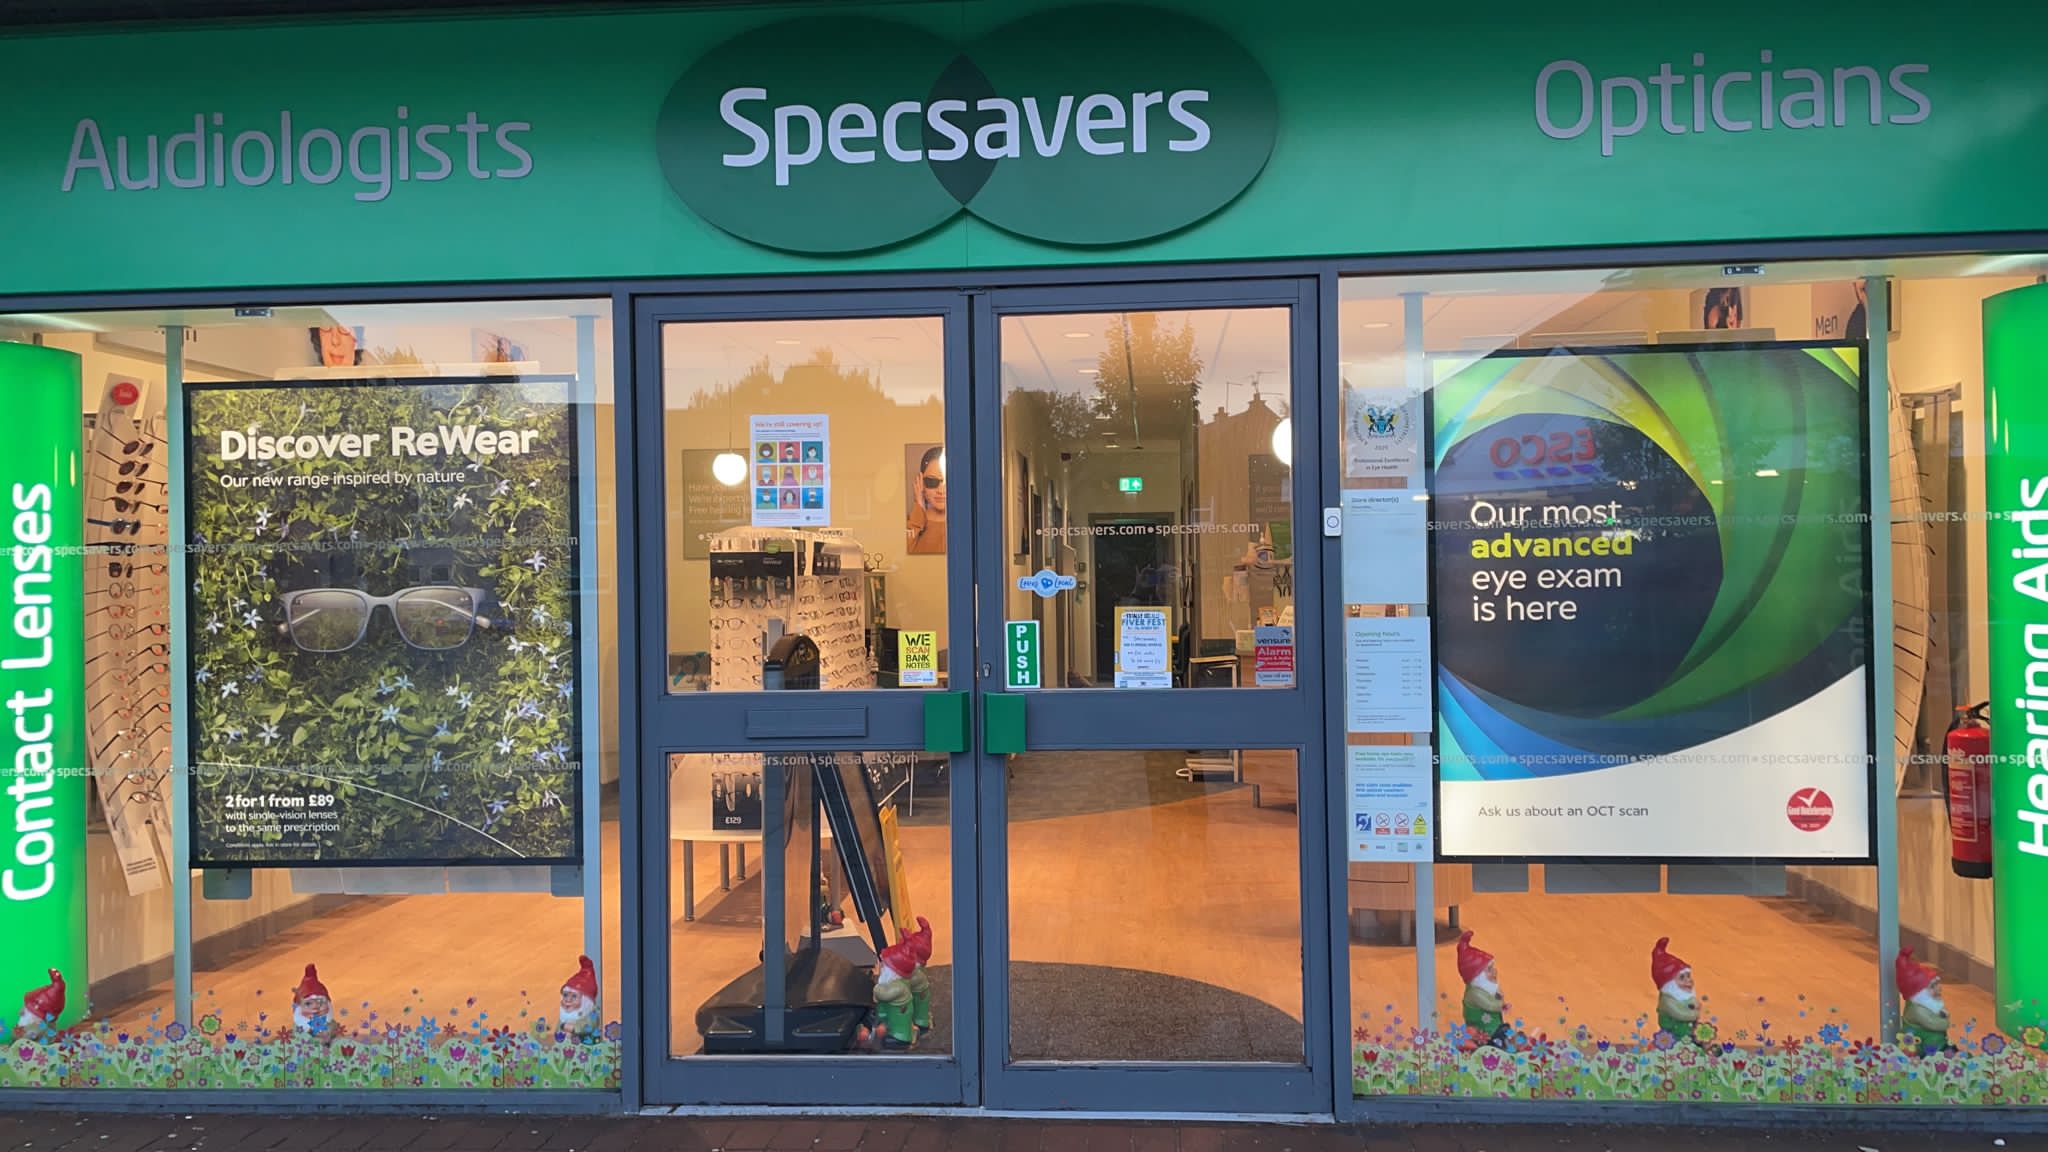 Images Specsavers Opticians and Audiologists - Linlithgow